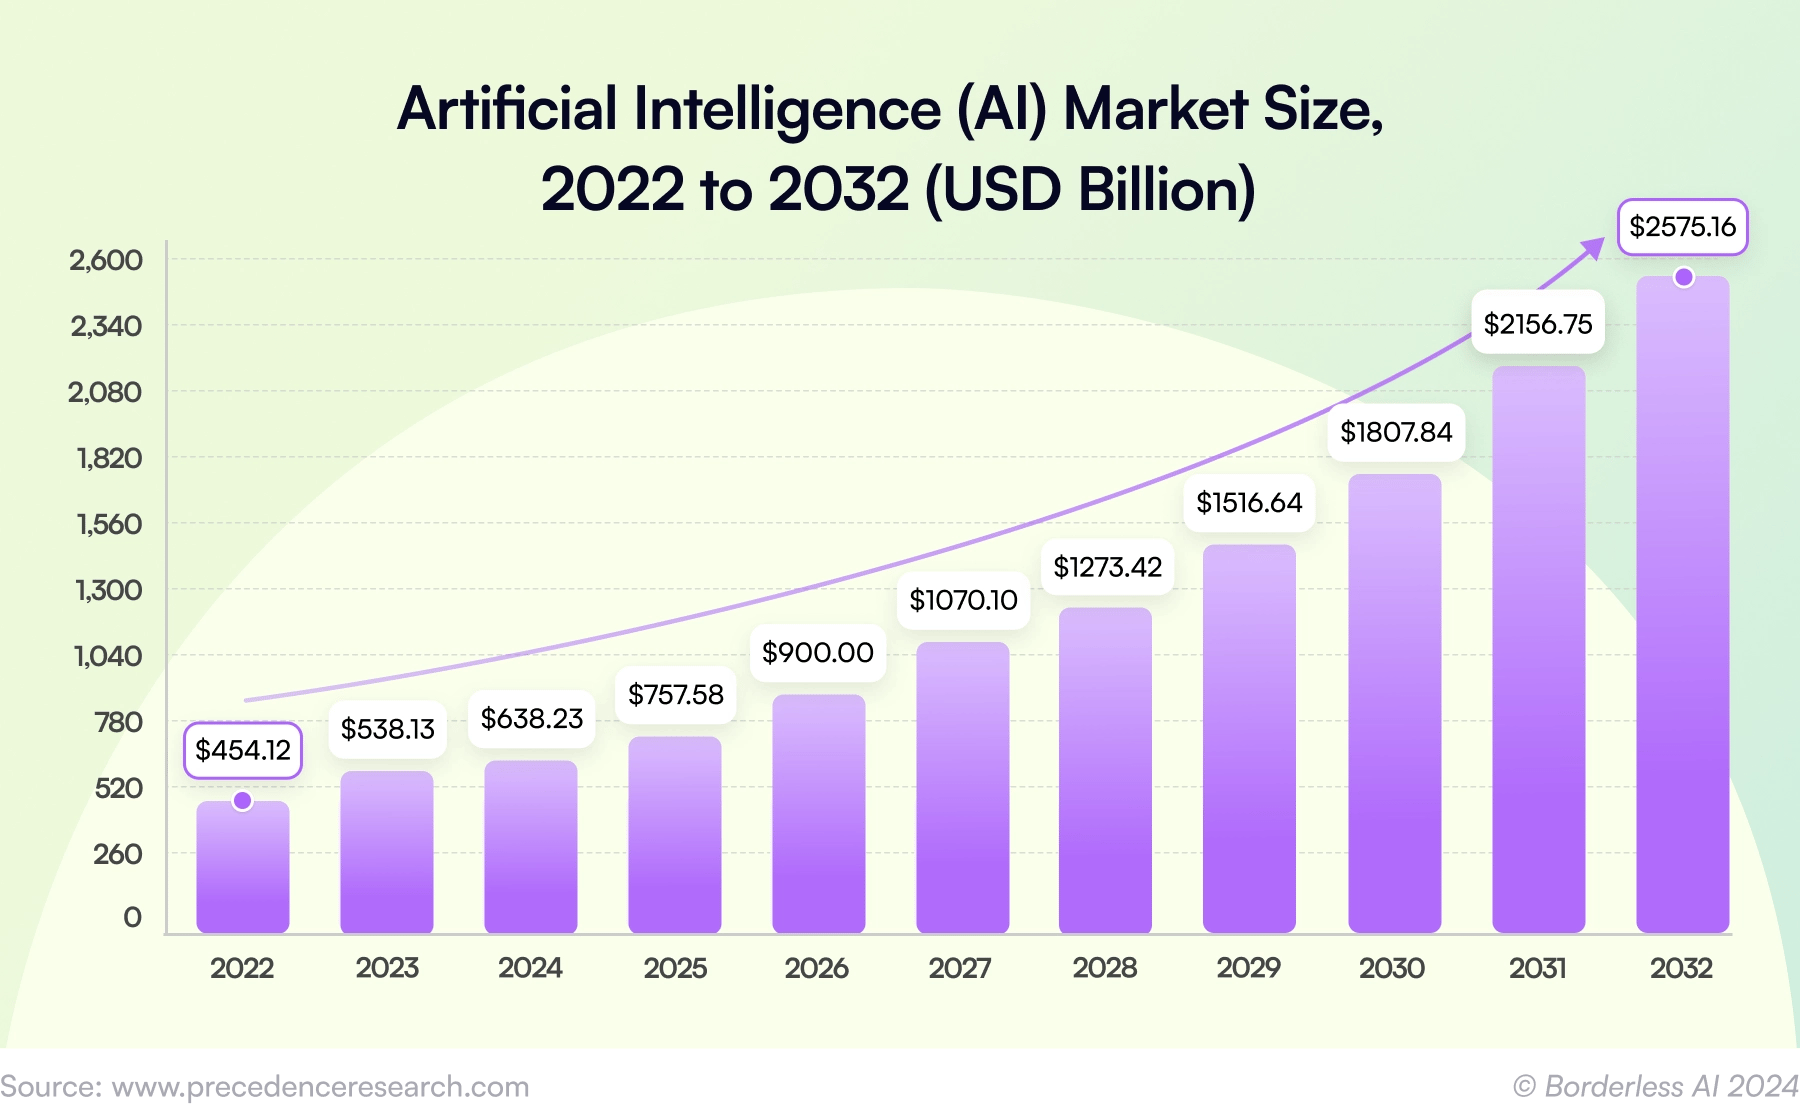 Artificial Intelligence adoption growth of 10 years